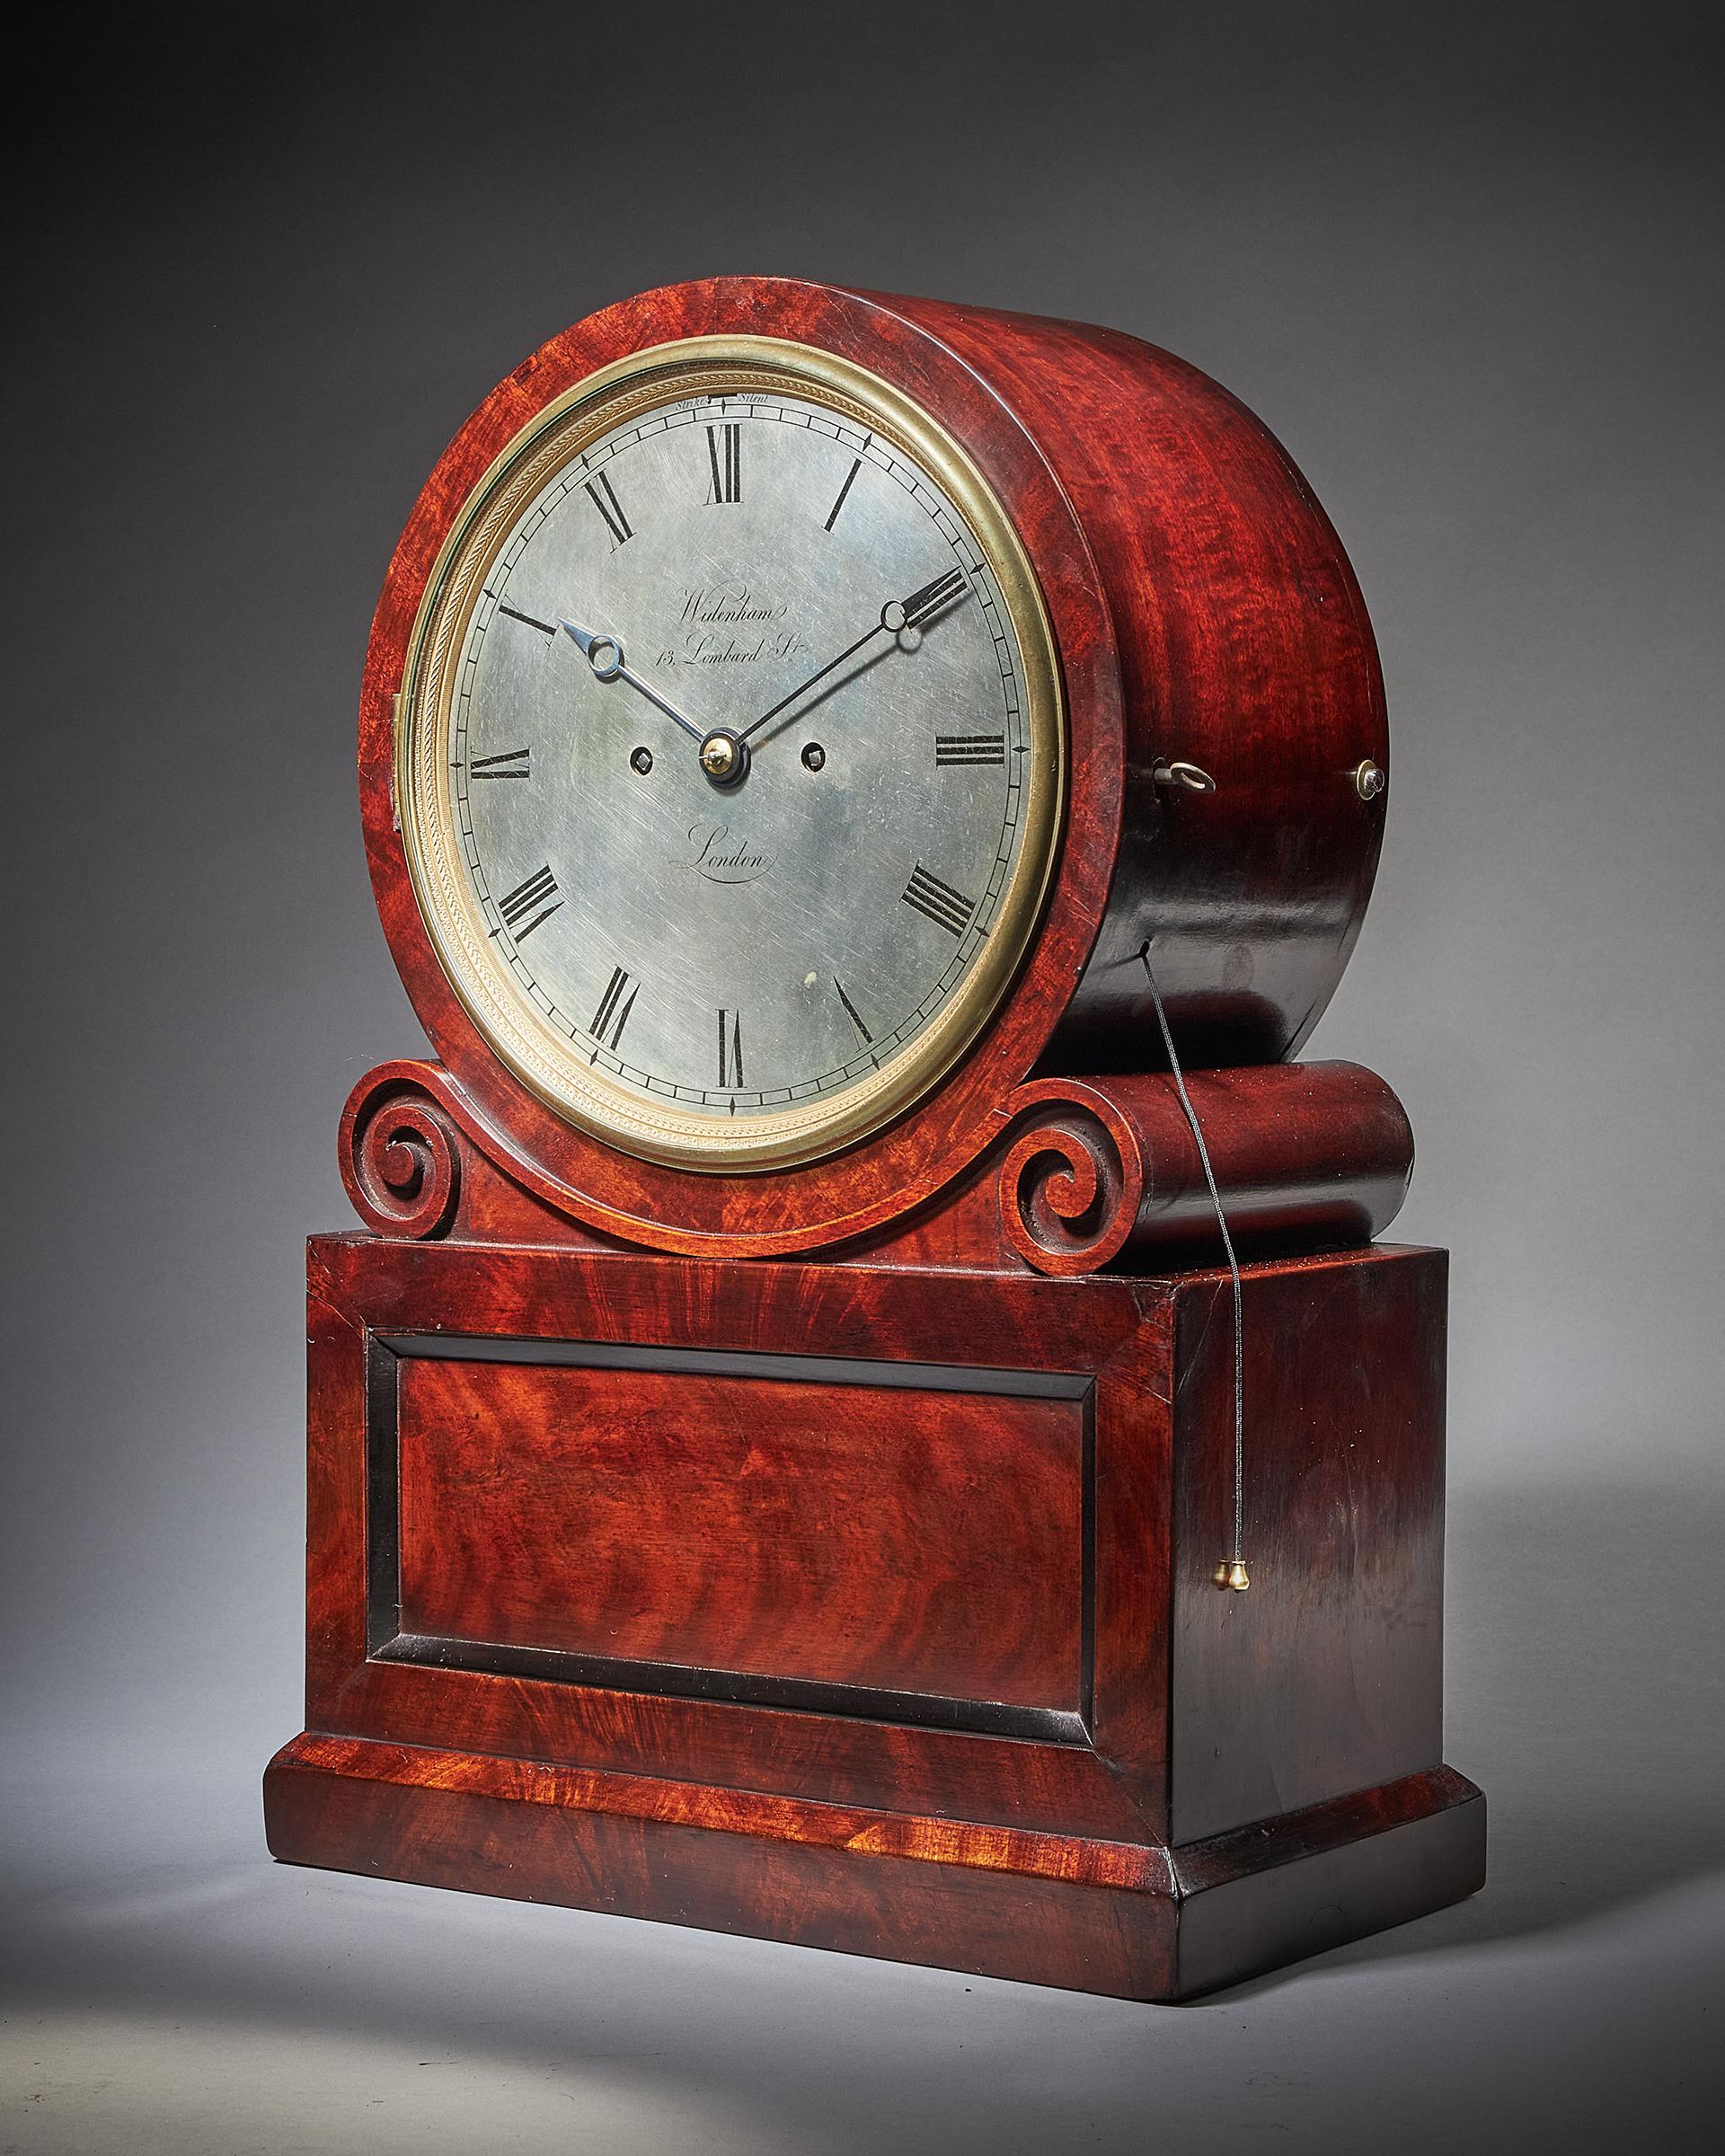 William IV/Early Victorian Table Clock by Widenham, c. 1835-40

This wonderful table clock has a spring-driven eight-day twin chain-fusee movement with going and striking trains with repetition. Unusually, it has circular plates to accommodate the